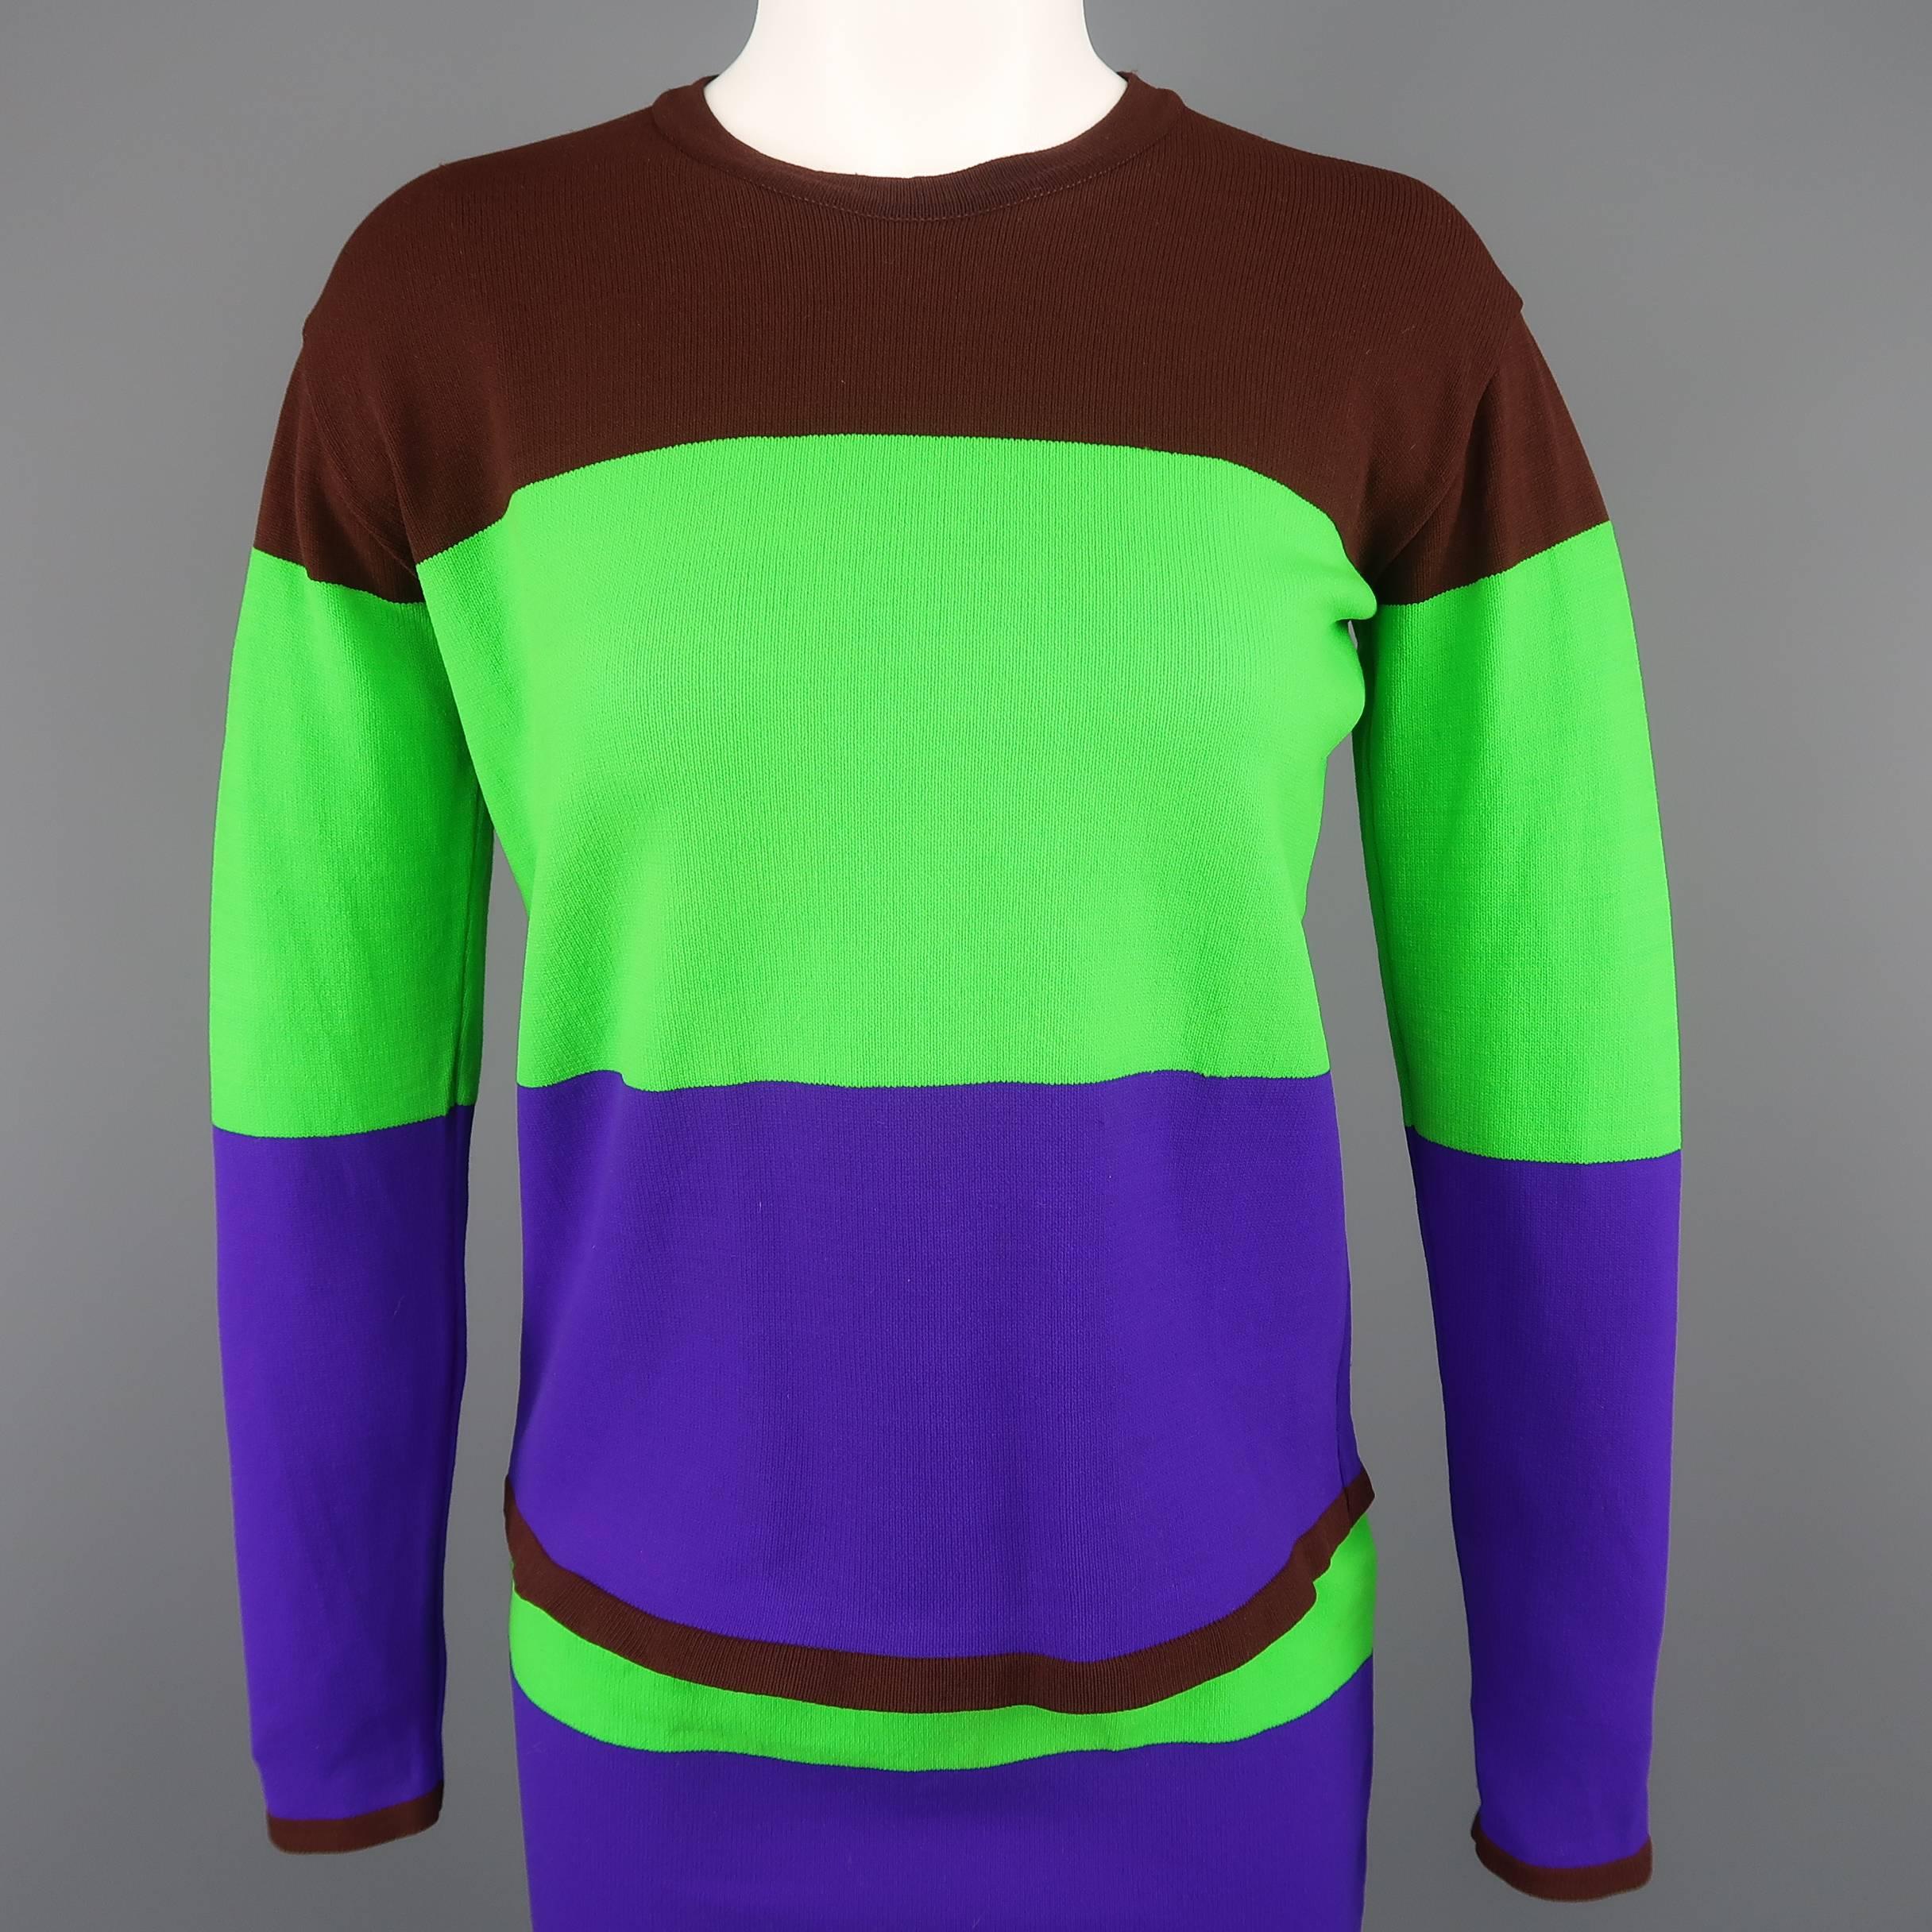 Vintage ISSEY MIYAKE sweater set ensemble comes in bright green, brown, and purple color block stripe stretch knit and includes a crewneck pullover and matching mini skirt. Made in Japan.
 
Excellent Pre-Owned Condition.
Marked: Top: M / Skirt: S
